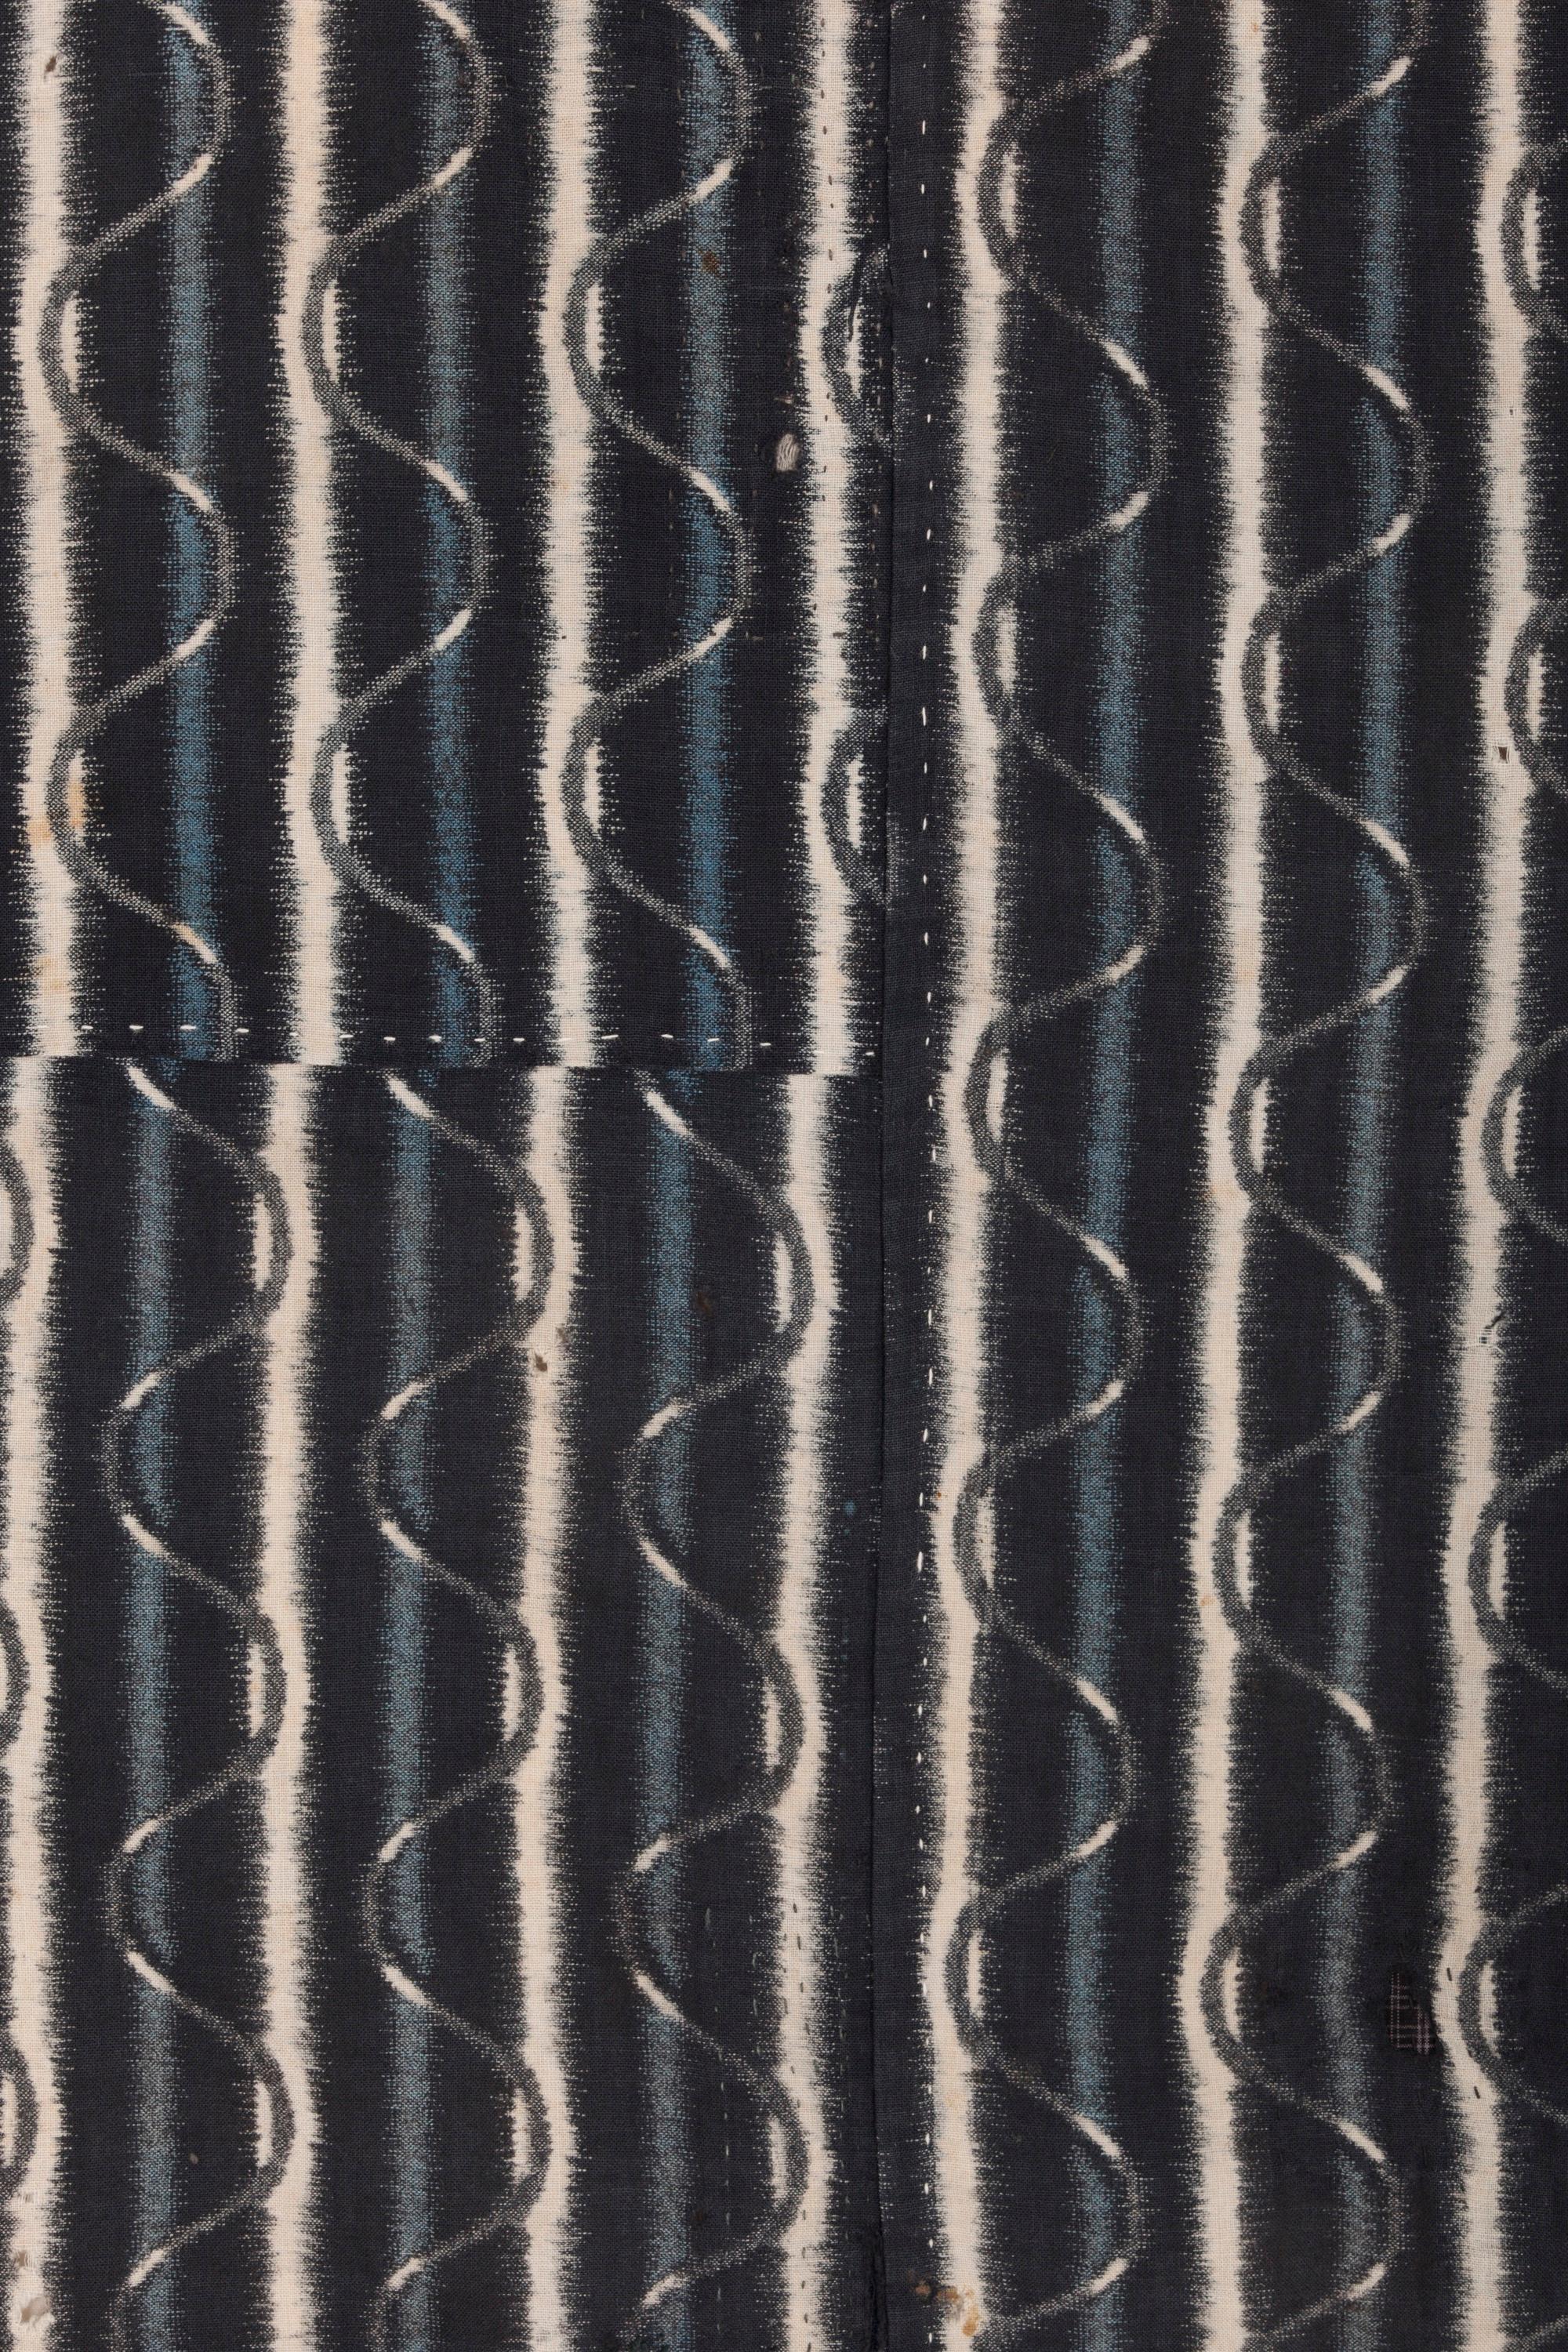 Meisen foundation fabric with wave pattern; patched with 11 varieties of kasuri (ikat); notably soft to the touch; possibly used as a furoshiki; 2 1/2 panels wide, hand constructed.